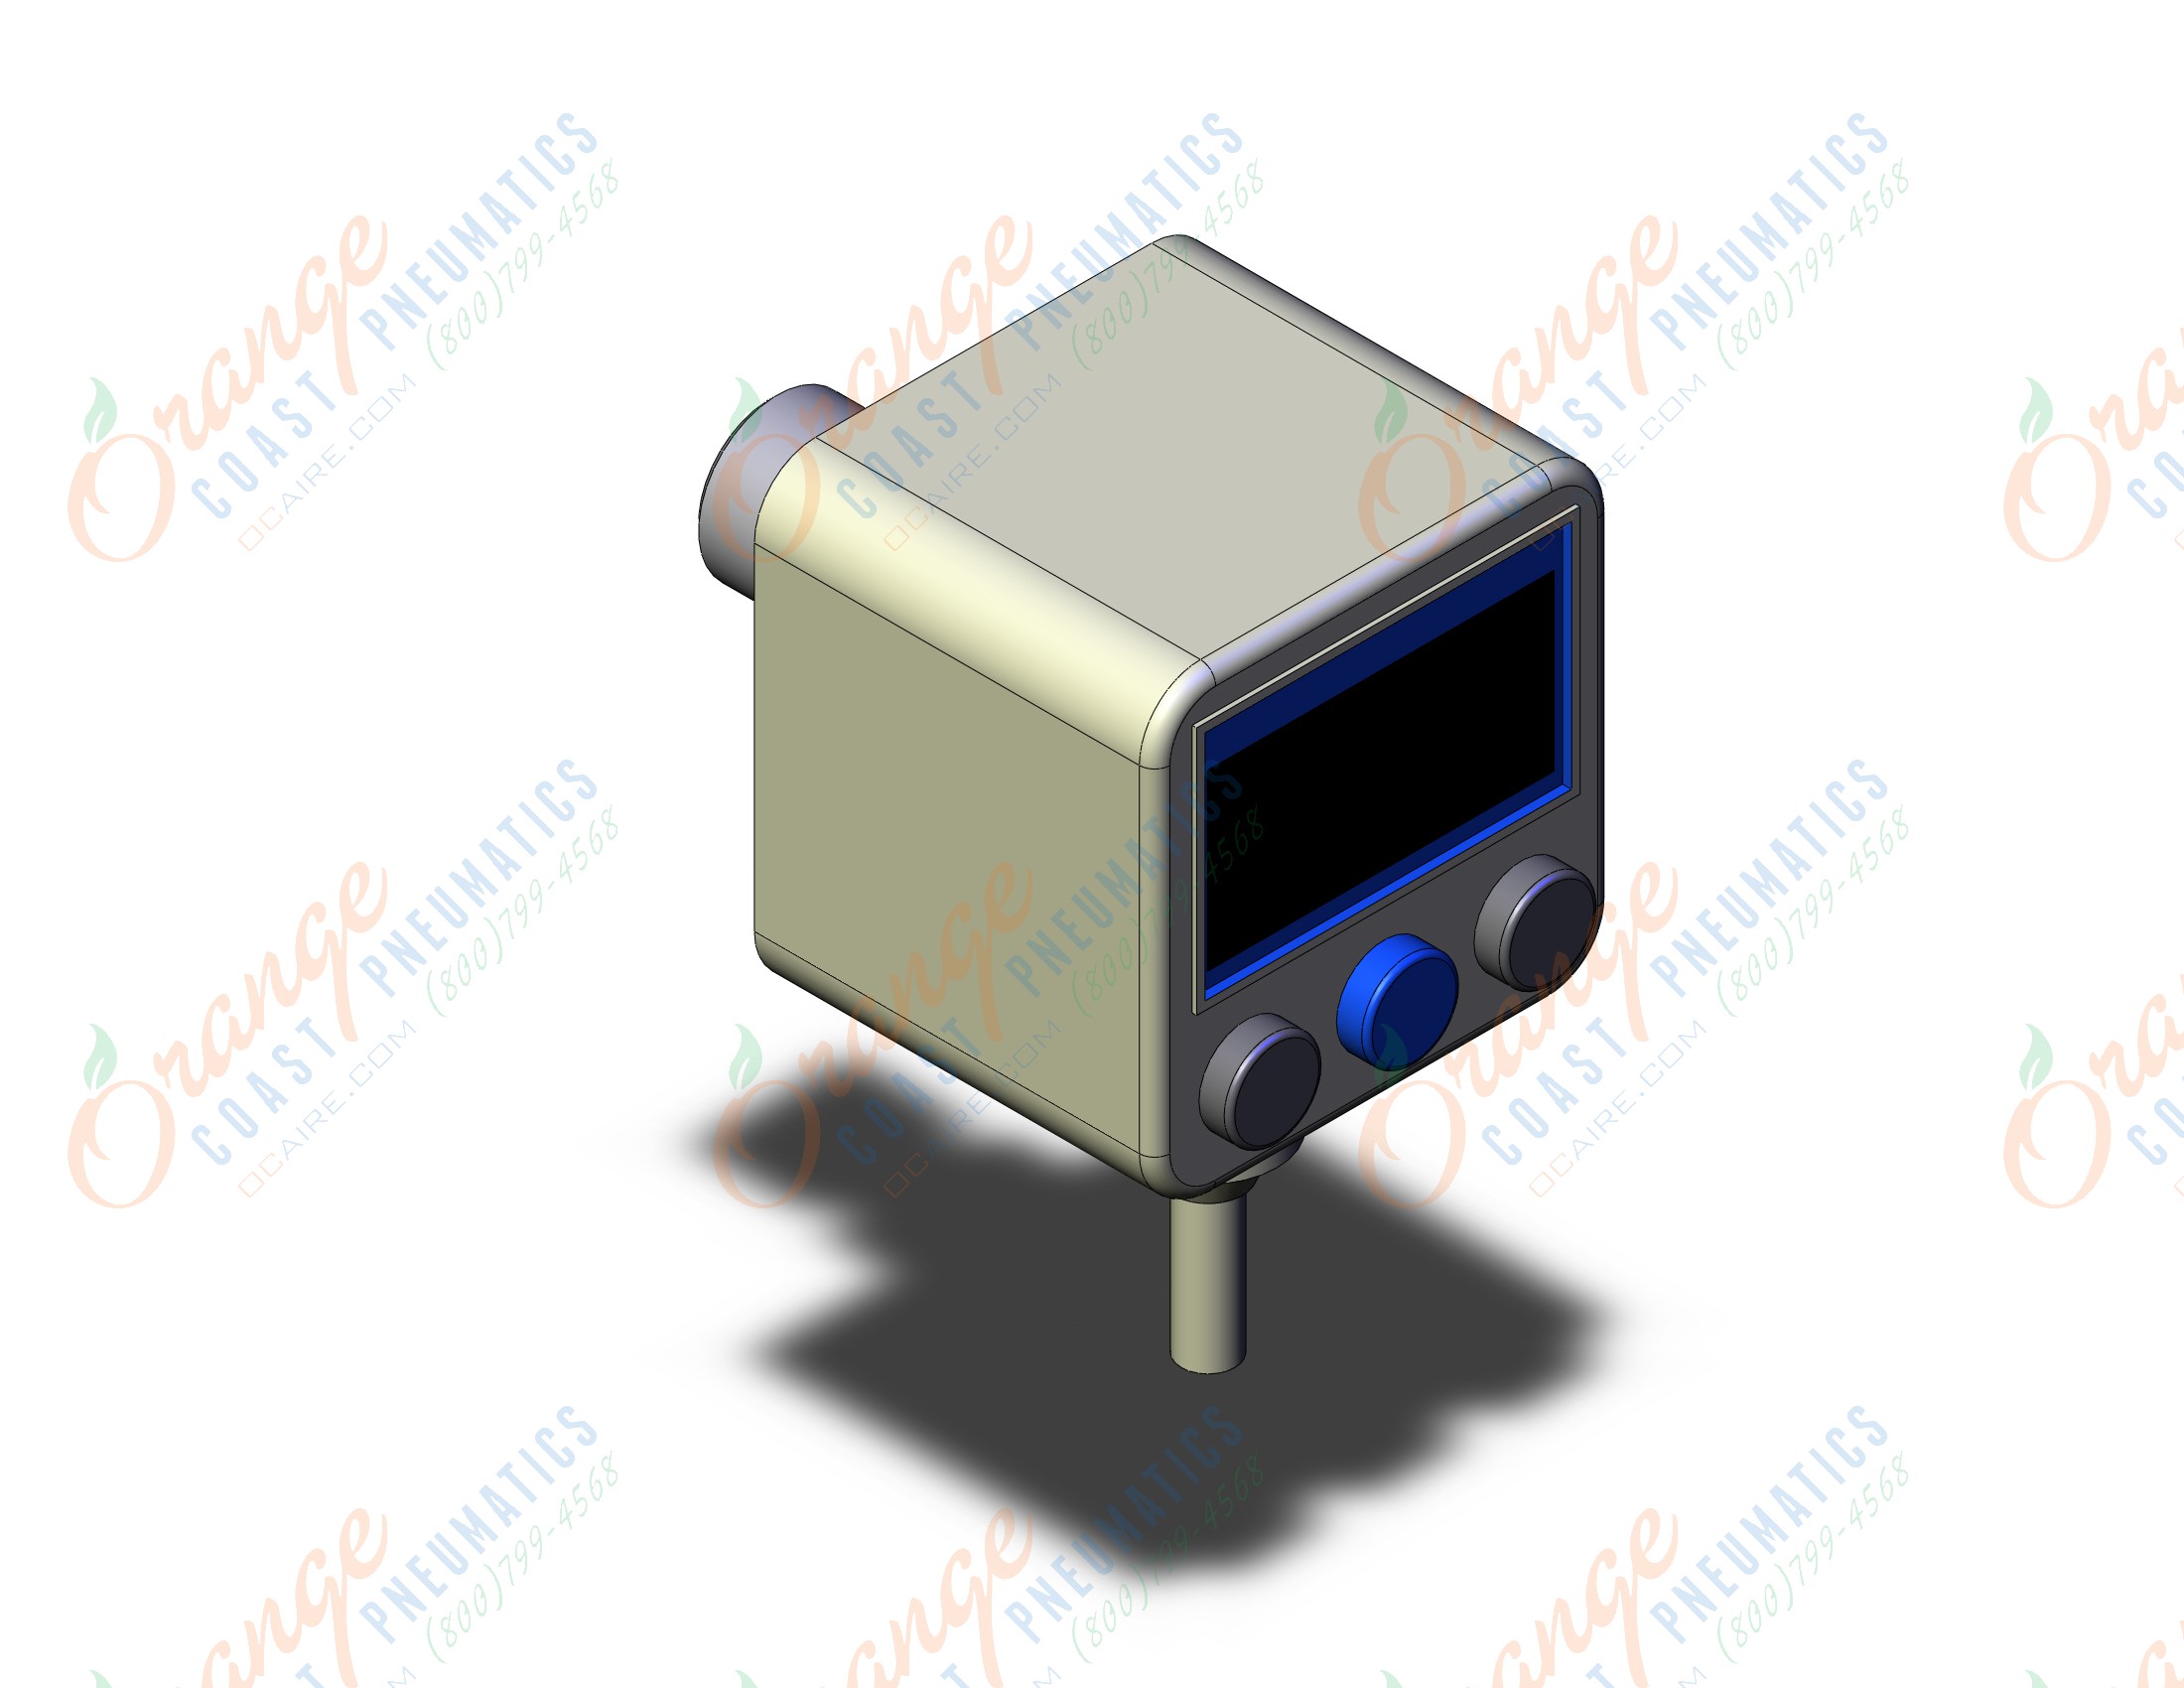 SMC ISE40A-N01-T-MK "ise40/50/60 1/8"" npt version ", ISE40/50/60 PRESSURE SWITCH